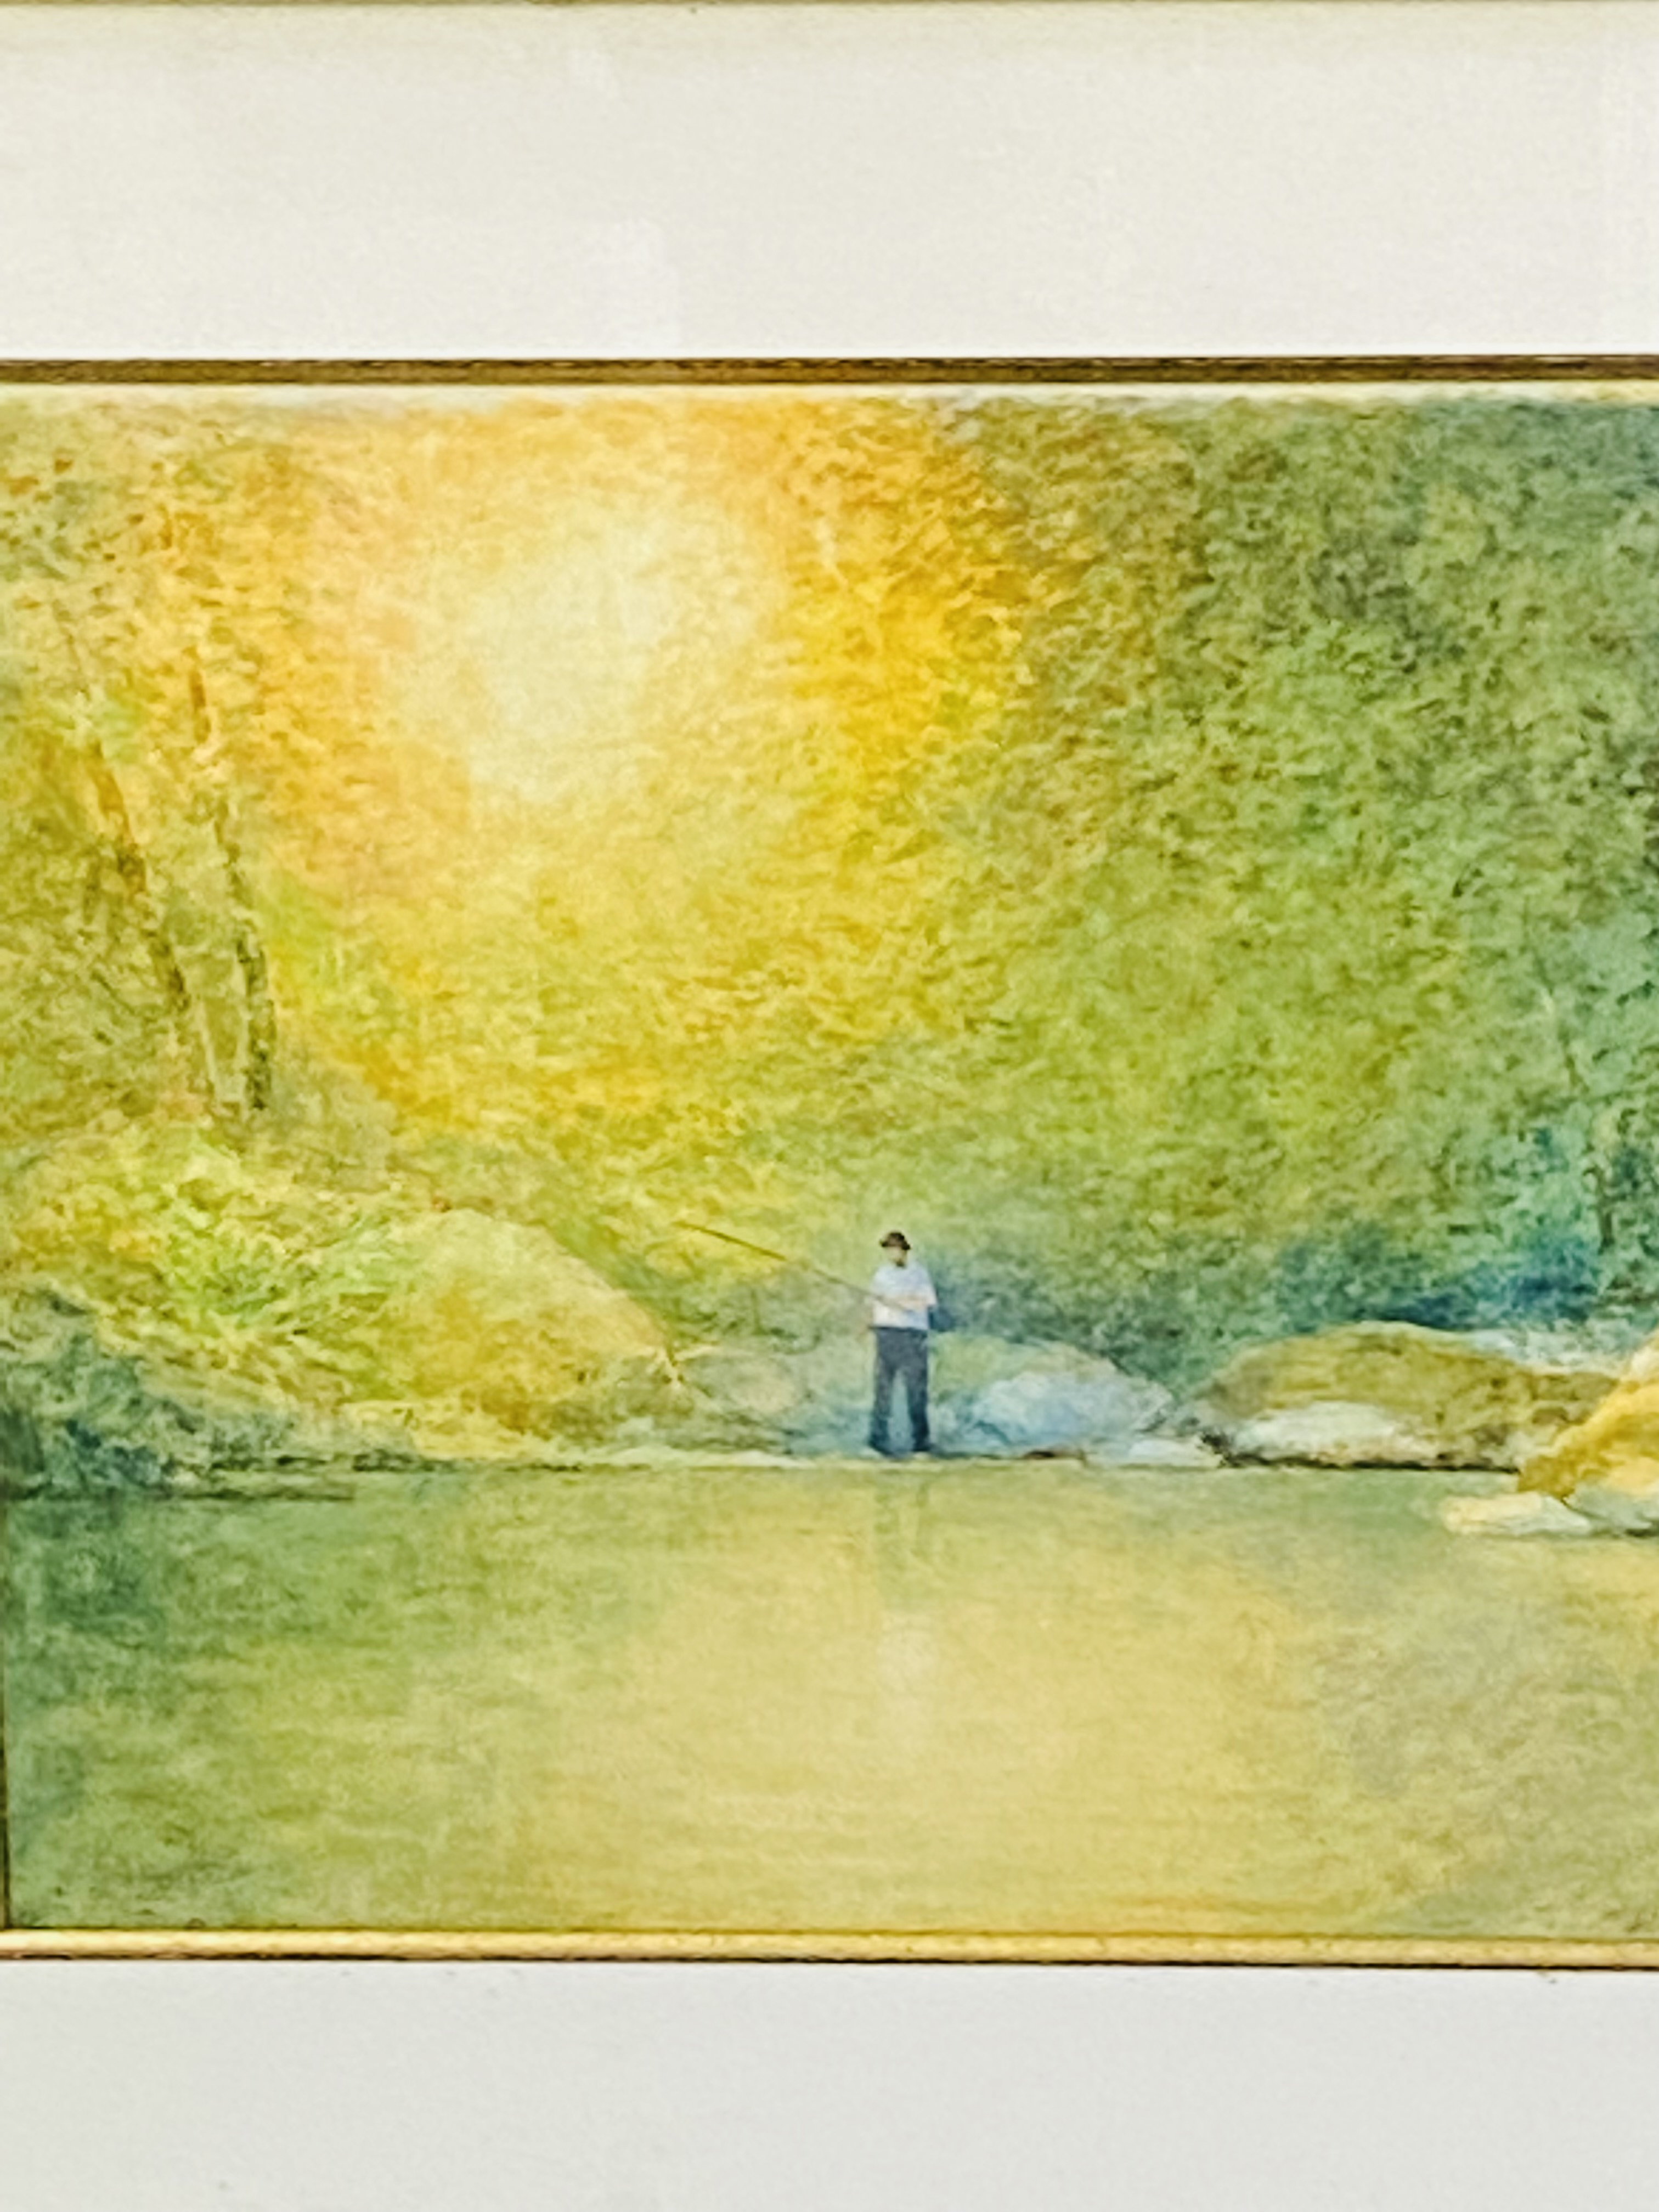 Framed and glazed watercolour of a man fishing - Image 2 of 4